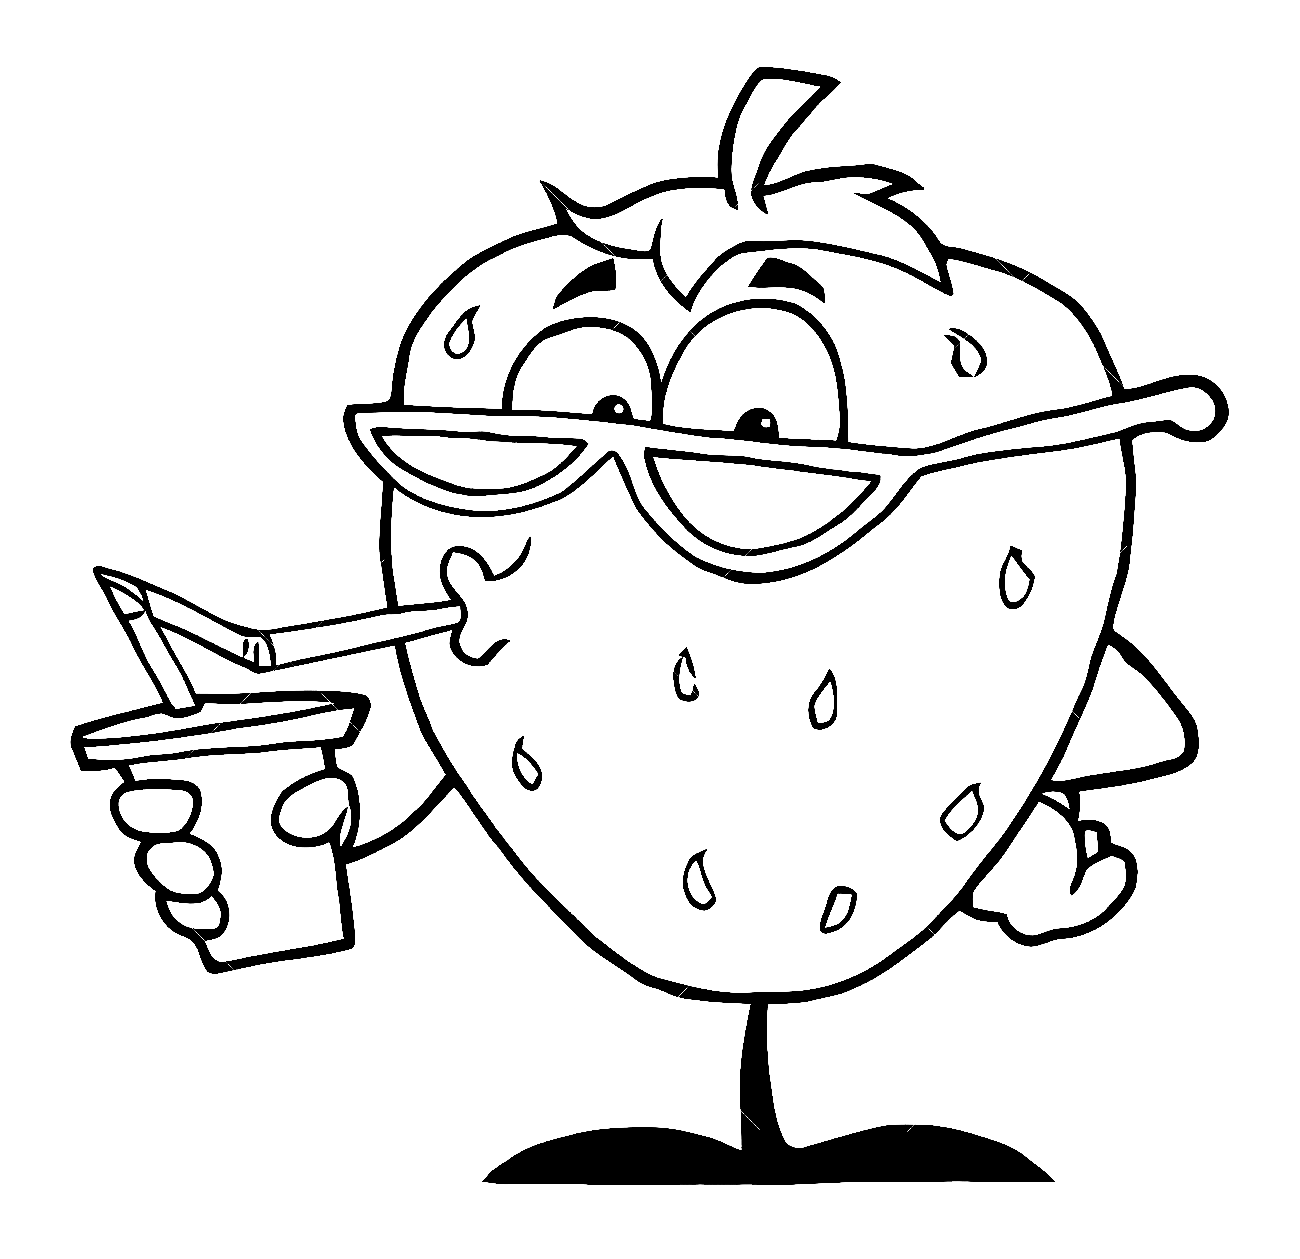 Strawberry Drinking Water Coloring Page